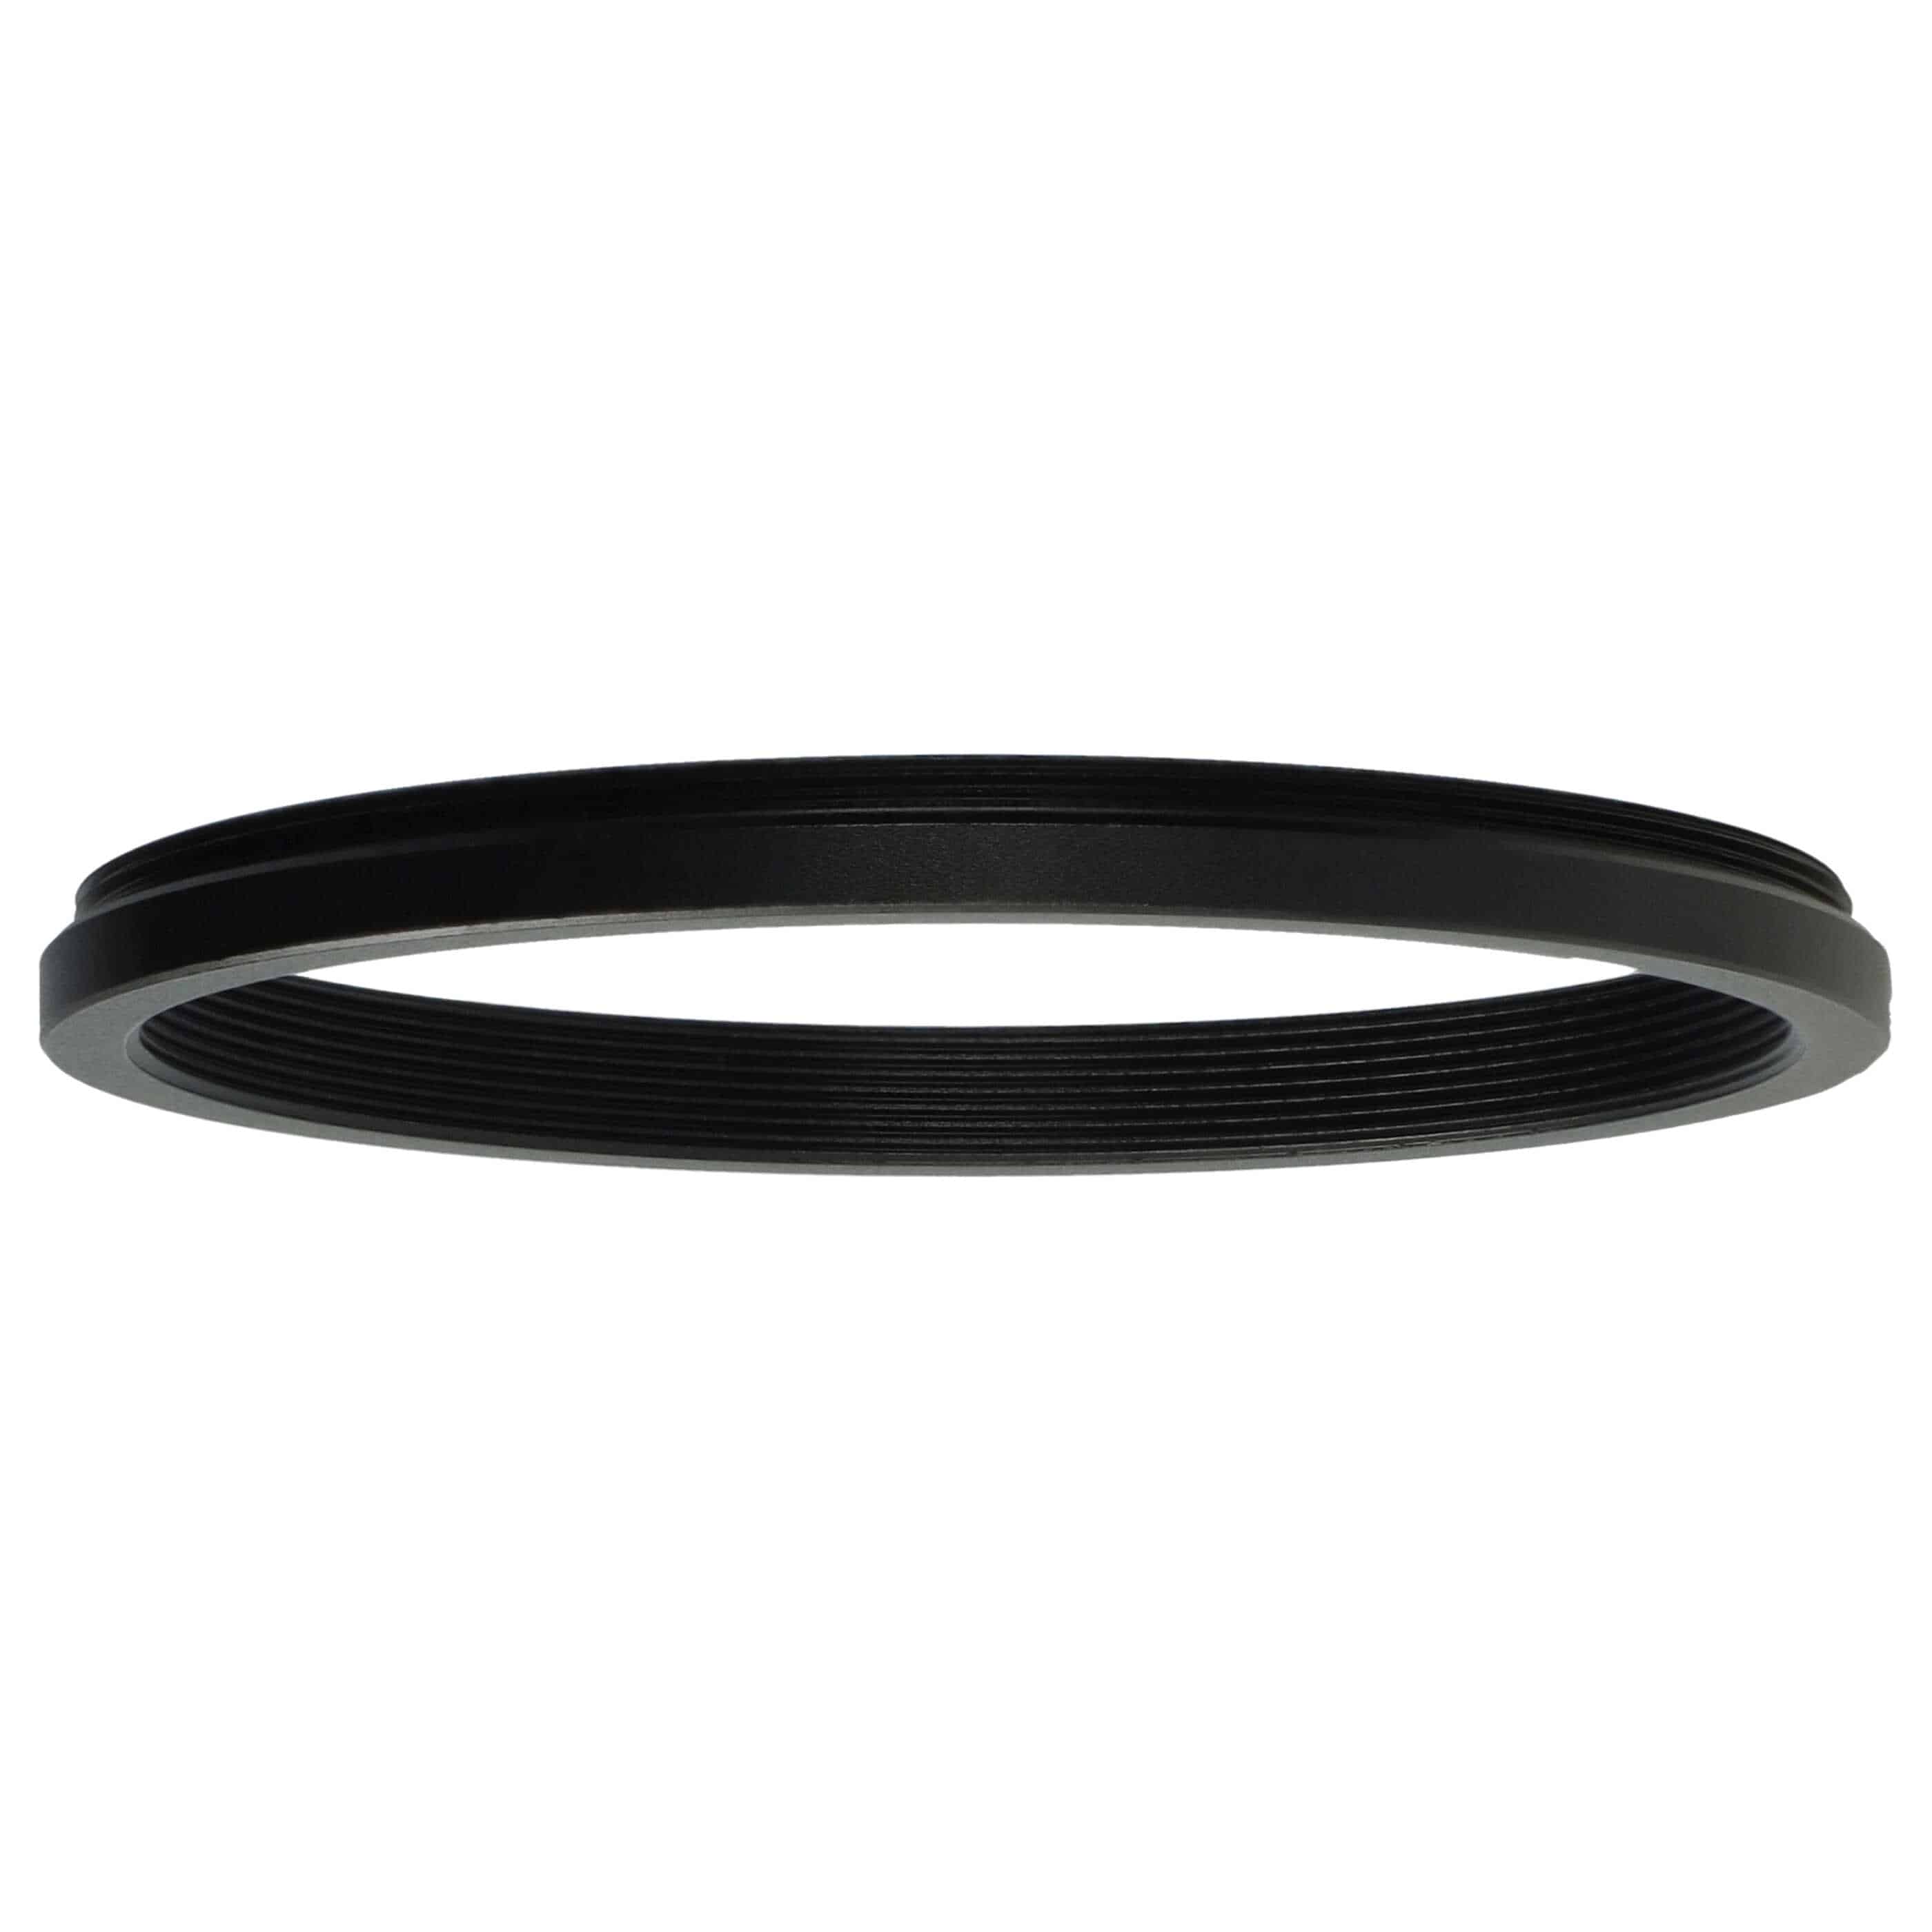 Step-Down Ring Adapter from 72 mm to 67 mm for various Camera Lenses